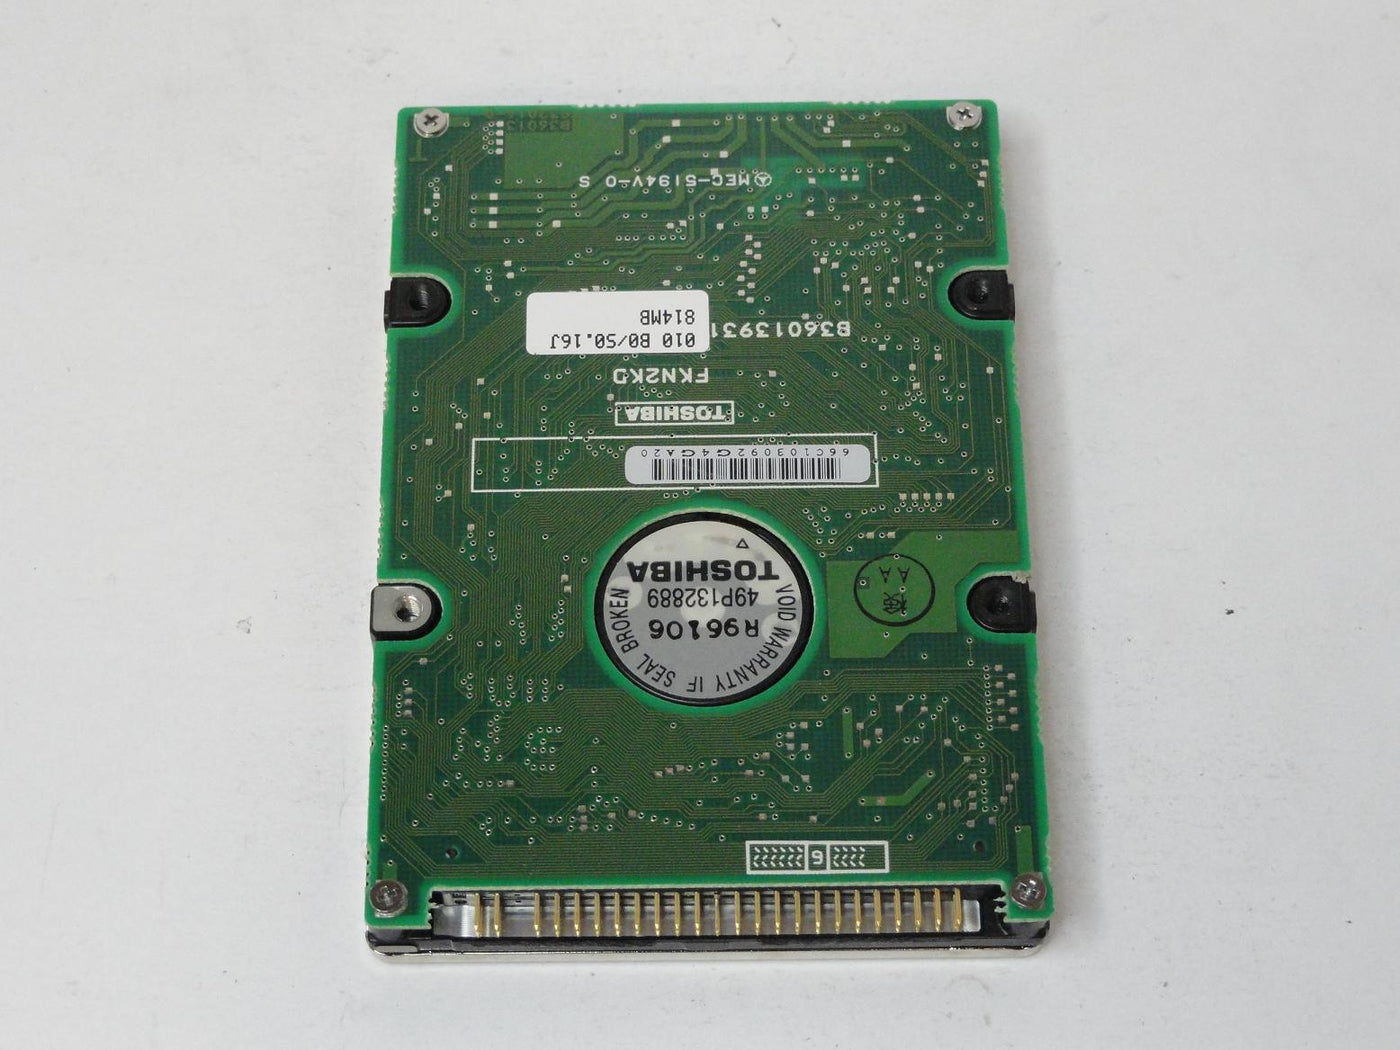 PR00176_HDD2517_Toshiba 814MB IDE 4200rpm 2.5in HDD - Image2